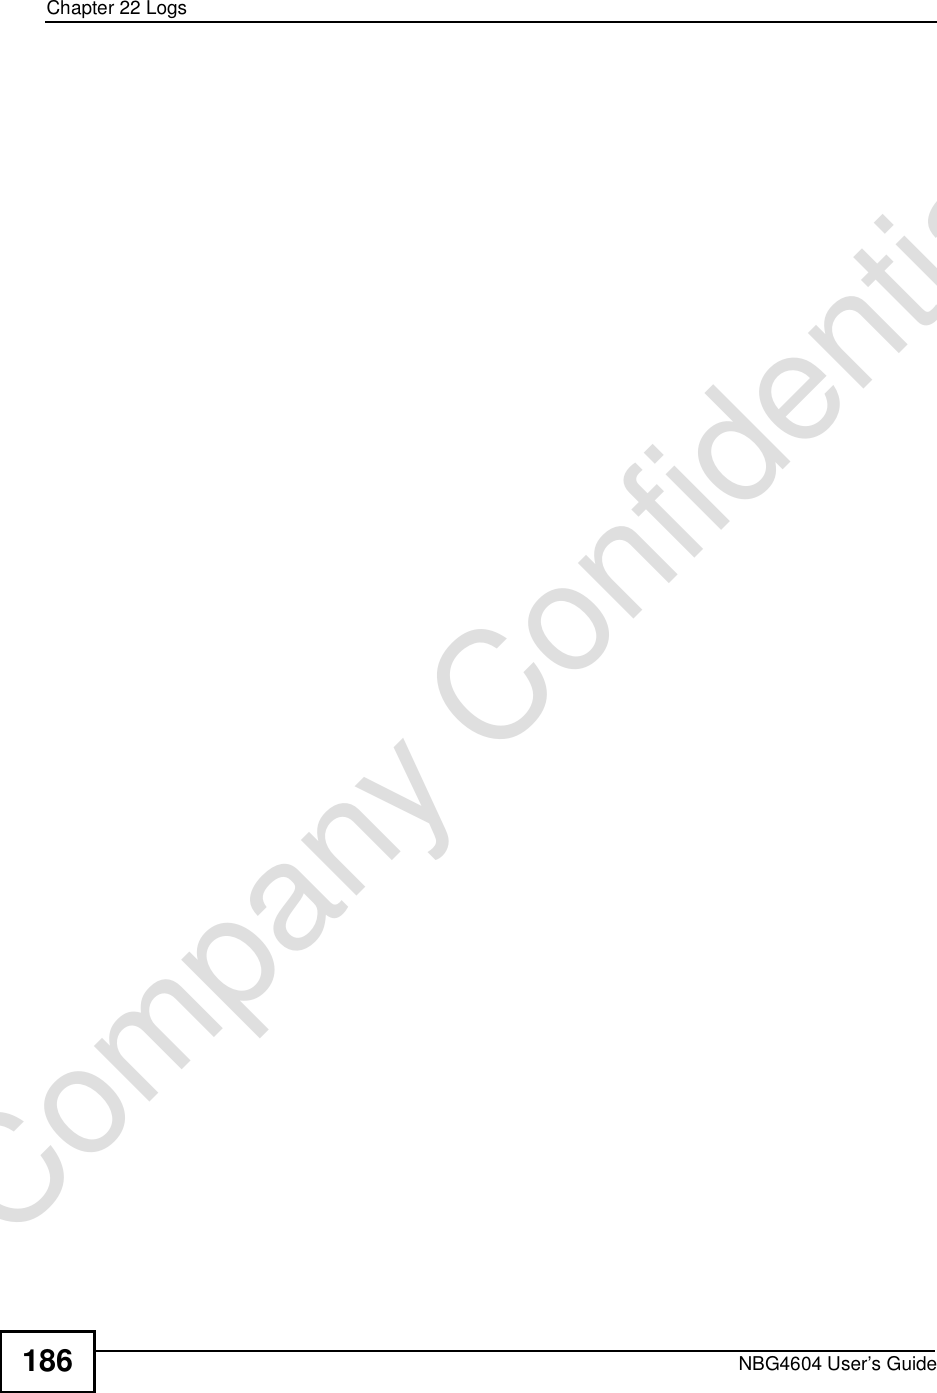 Chapter 22LogsNBG4604 User’s Guide186Company Confidential